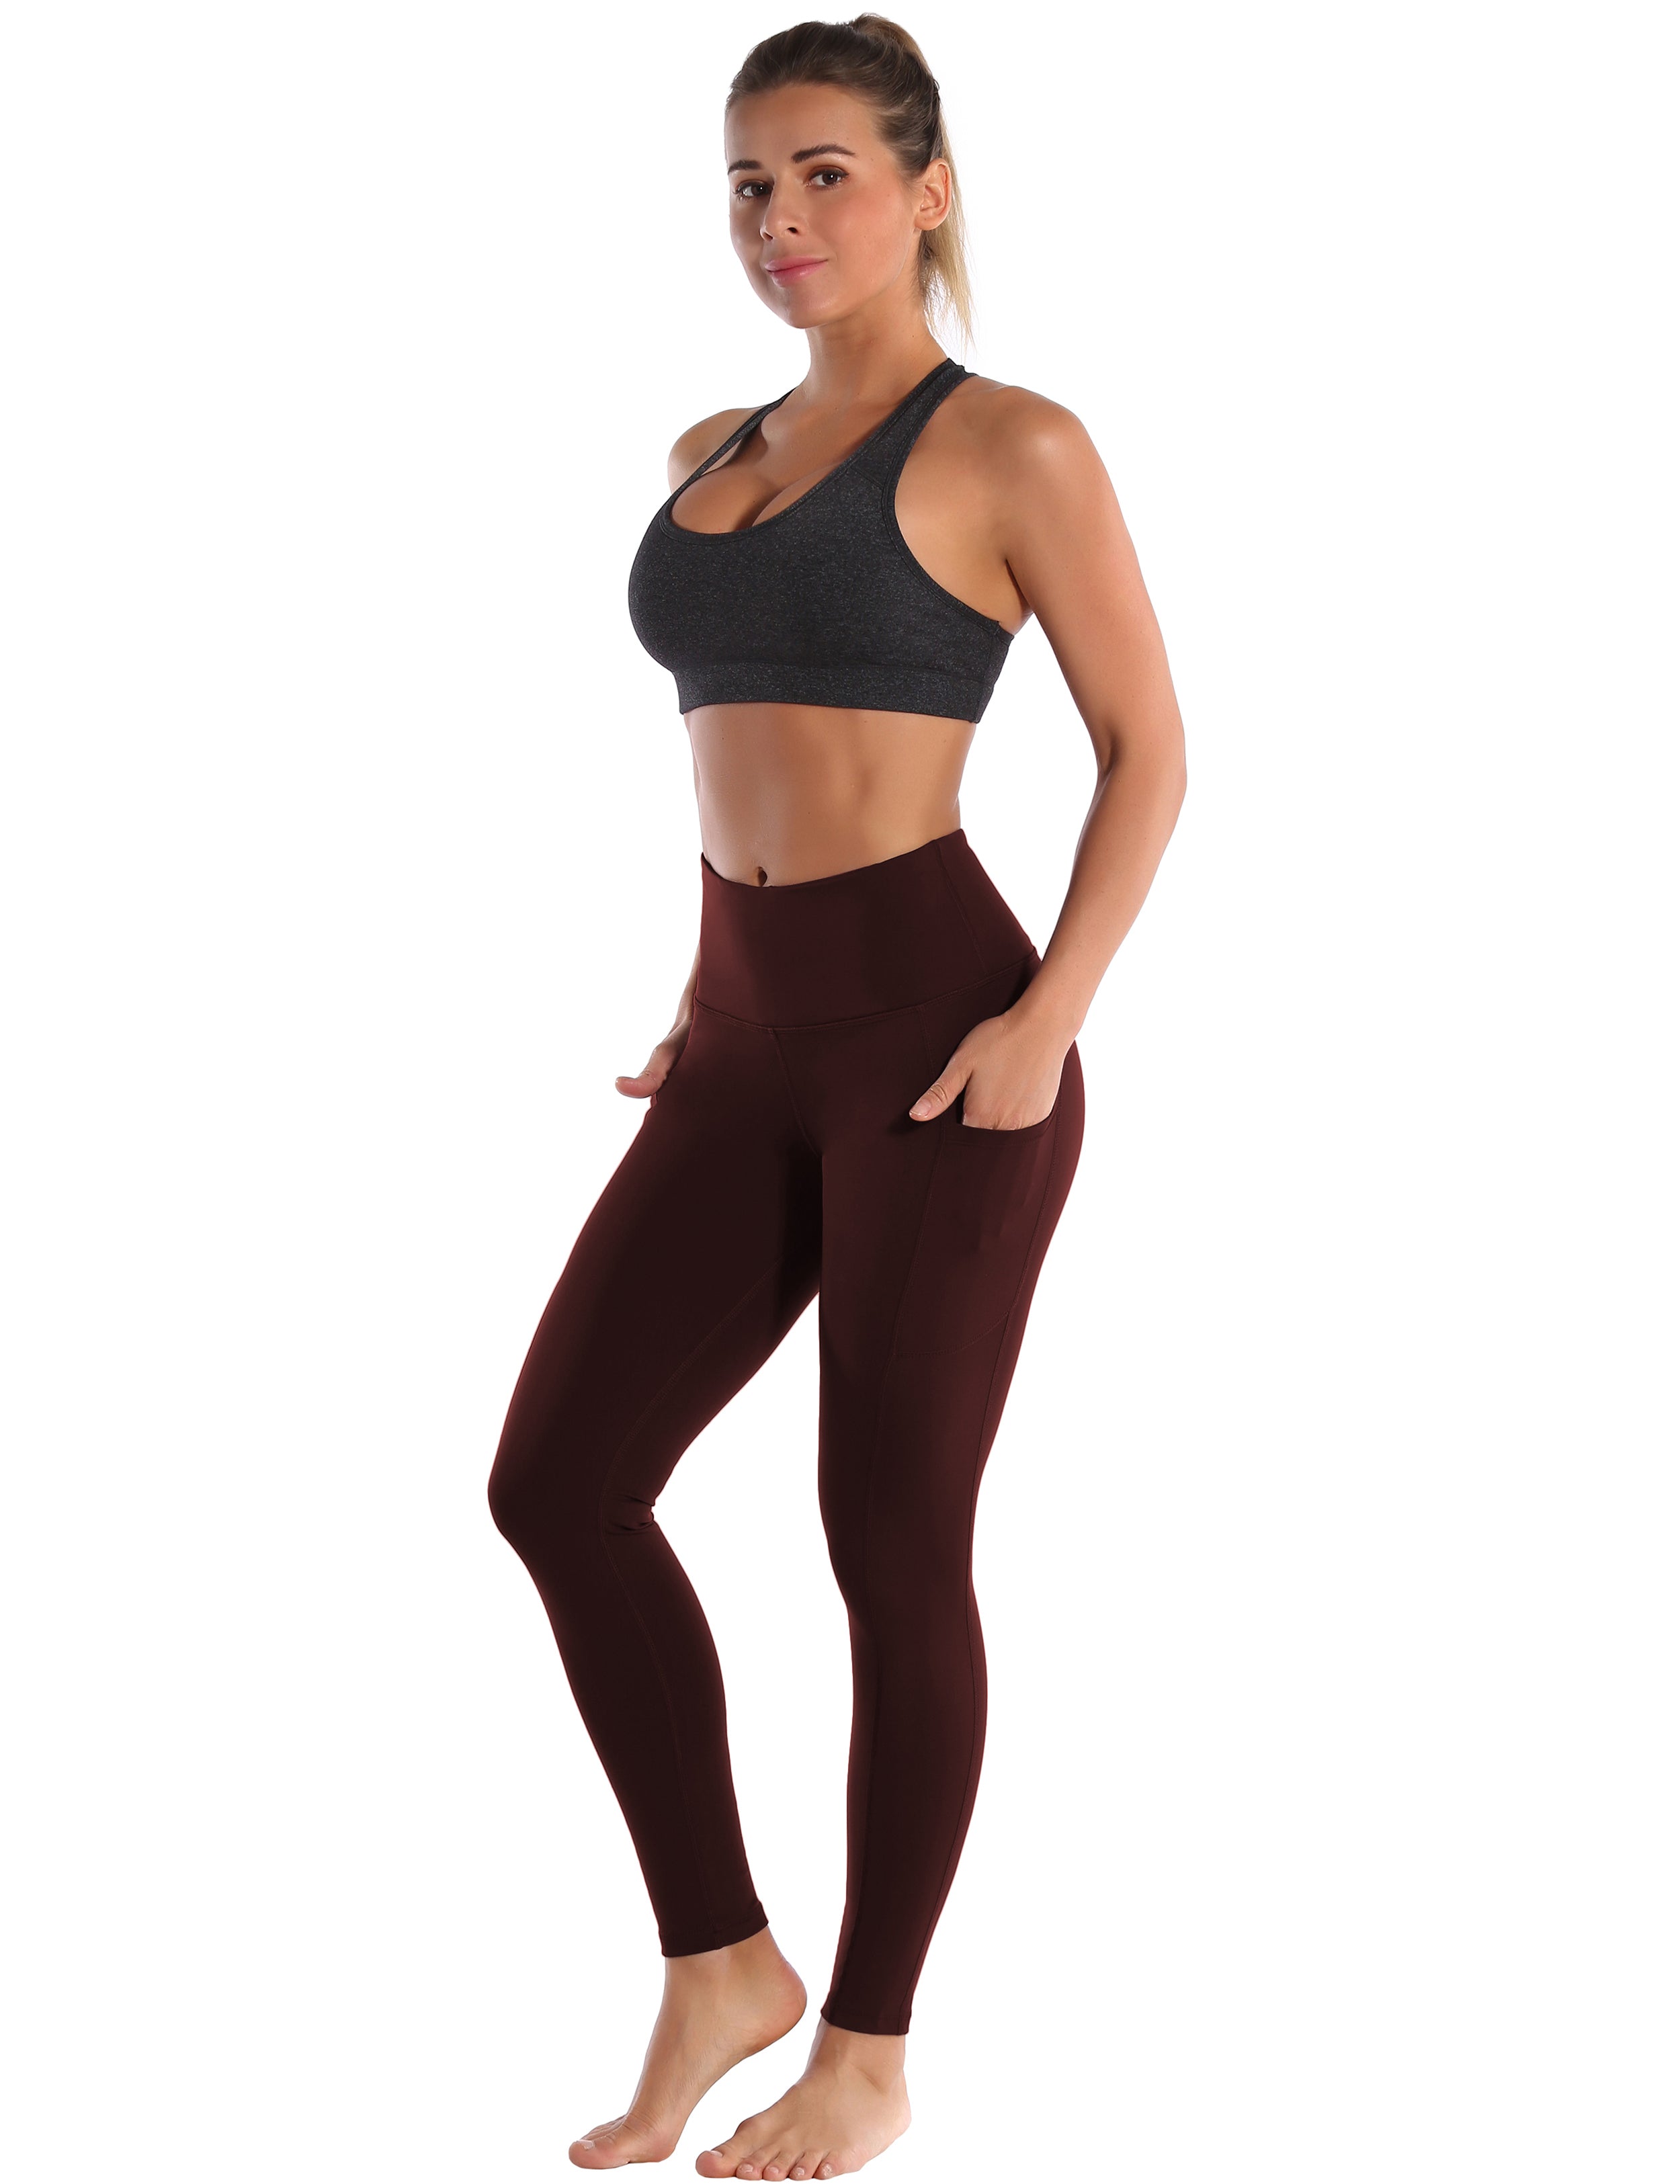 Hip Line Side Pockets Yoga Pants mahoganymaroon Sexy Hip Line Side Pockets 75%Nylon/25%Spandex Fabric doesn't attract lint easily 4-way stretch No see-through Moisture-wicking Tummy control Inner pocket Two lengths